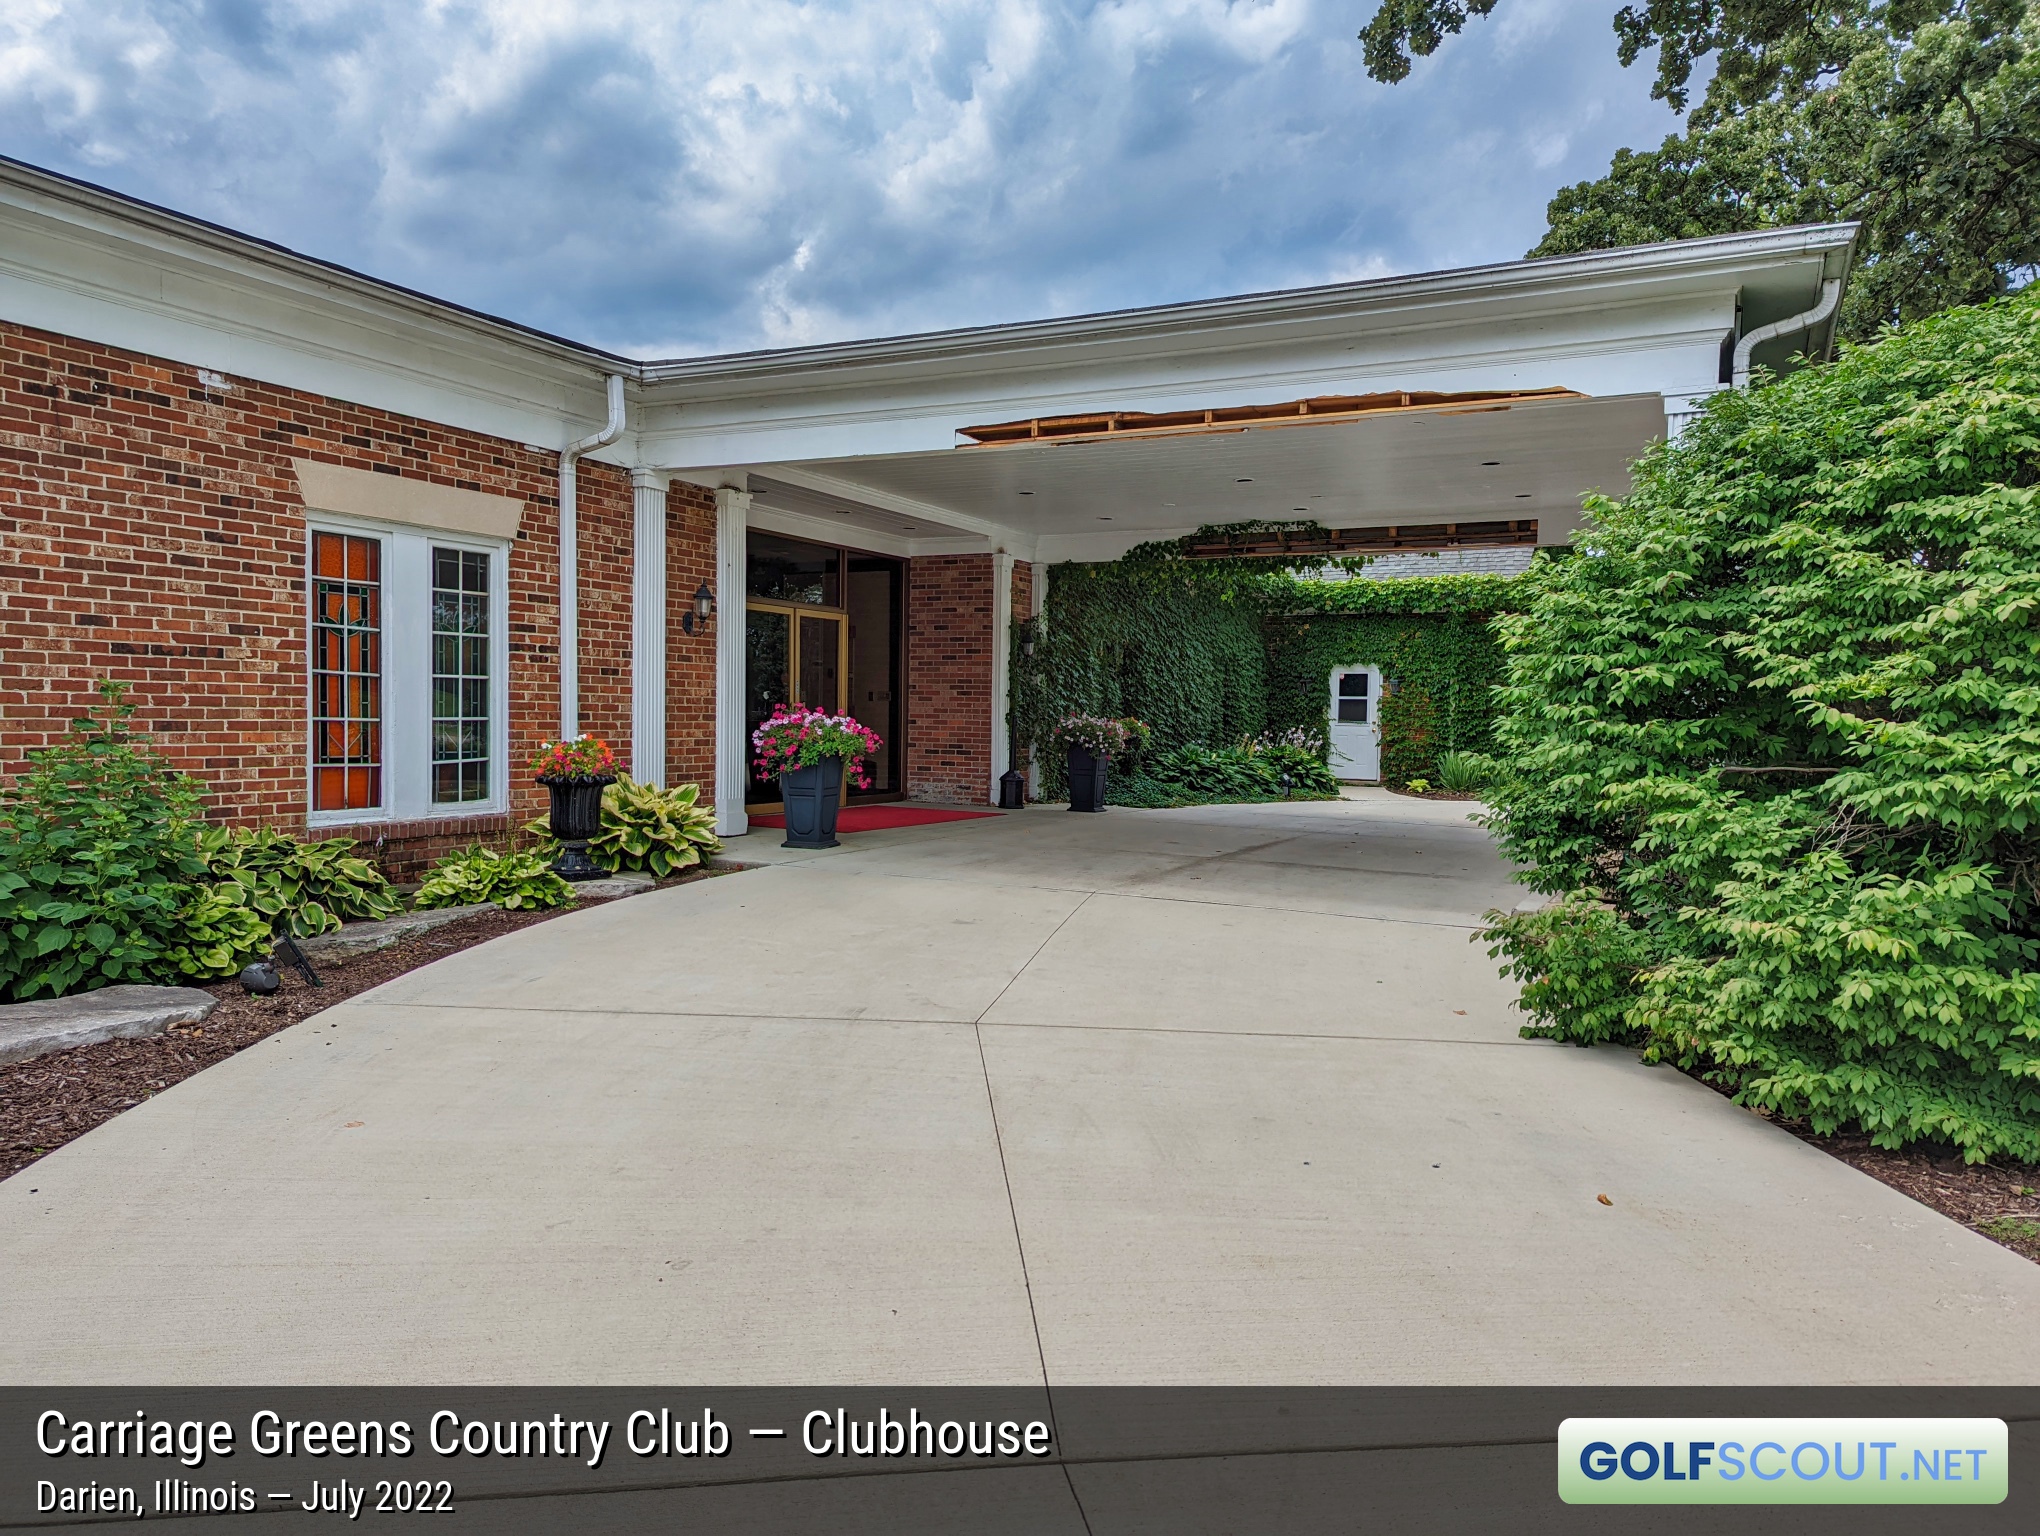 Photo of the clubhouse at Carriage Greens Country Club in Darien, Illinois. I hope they fix the awning damage soon before any animals move in there.